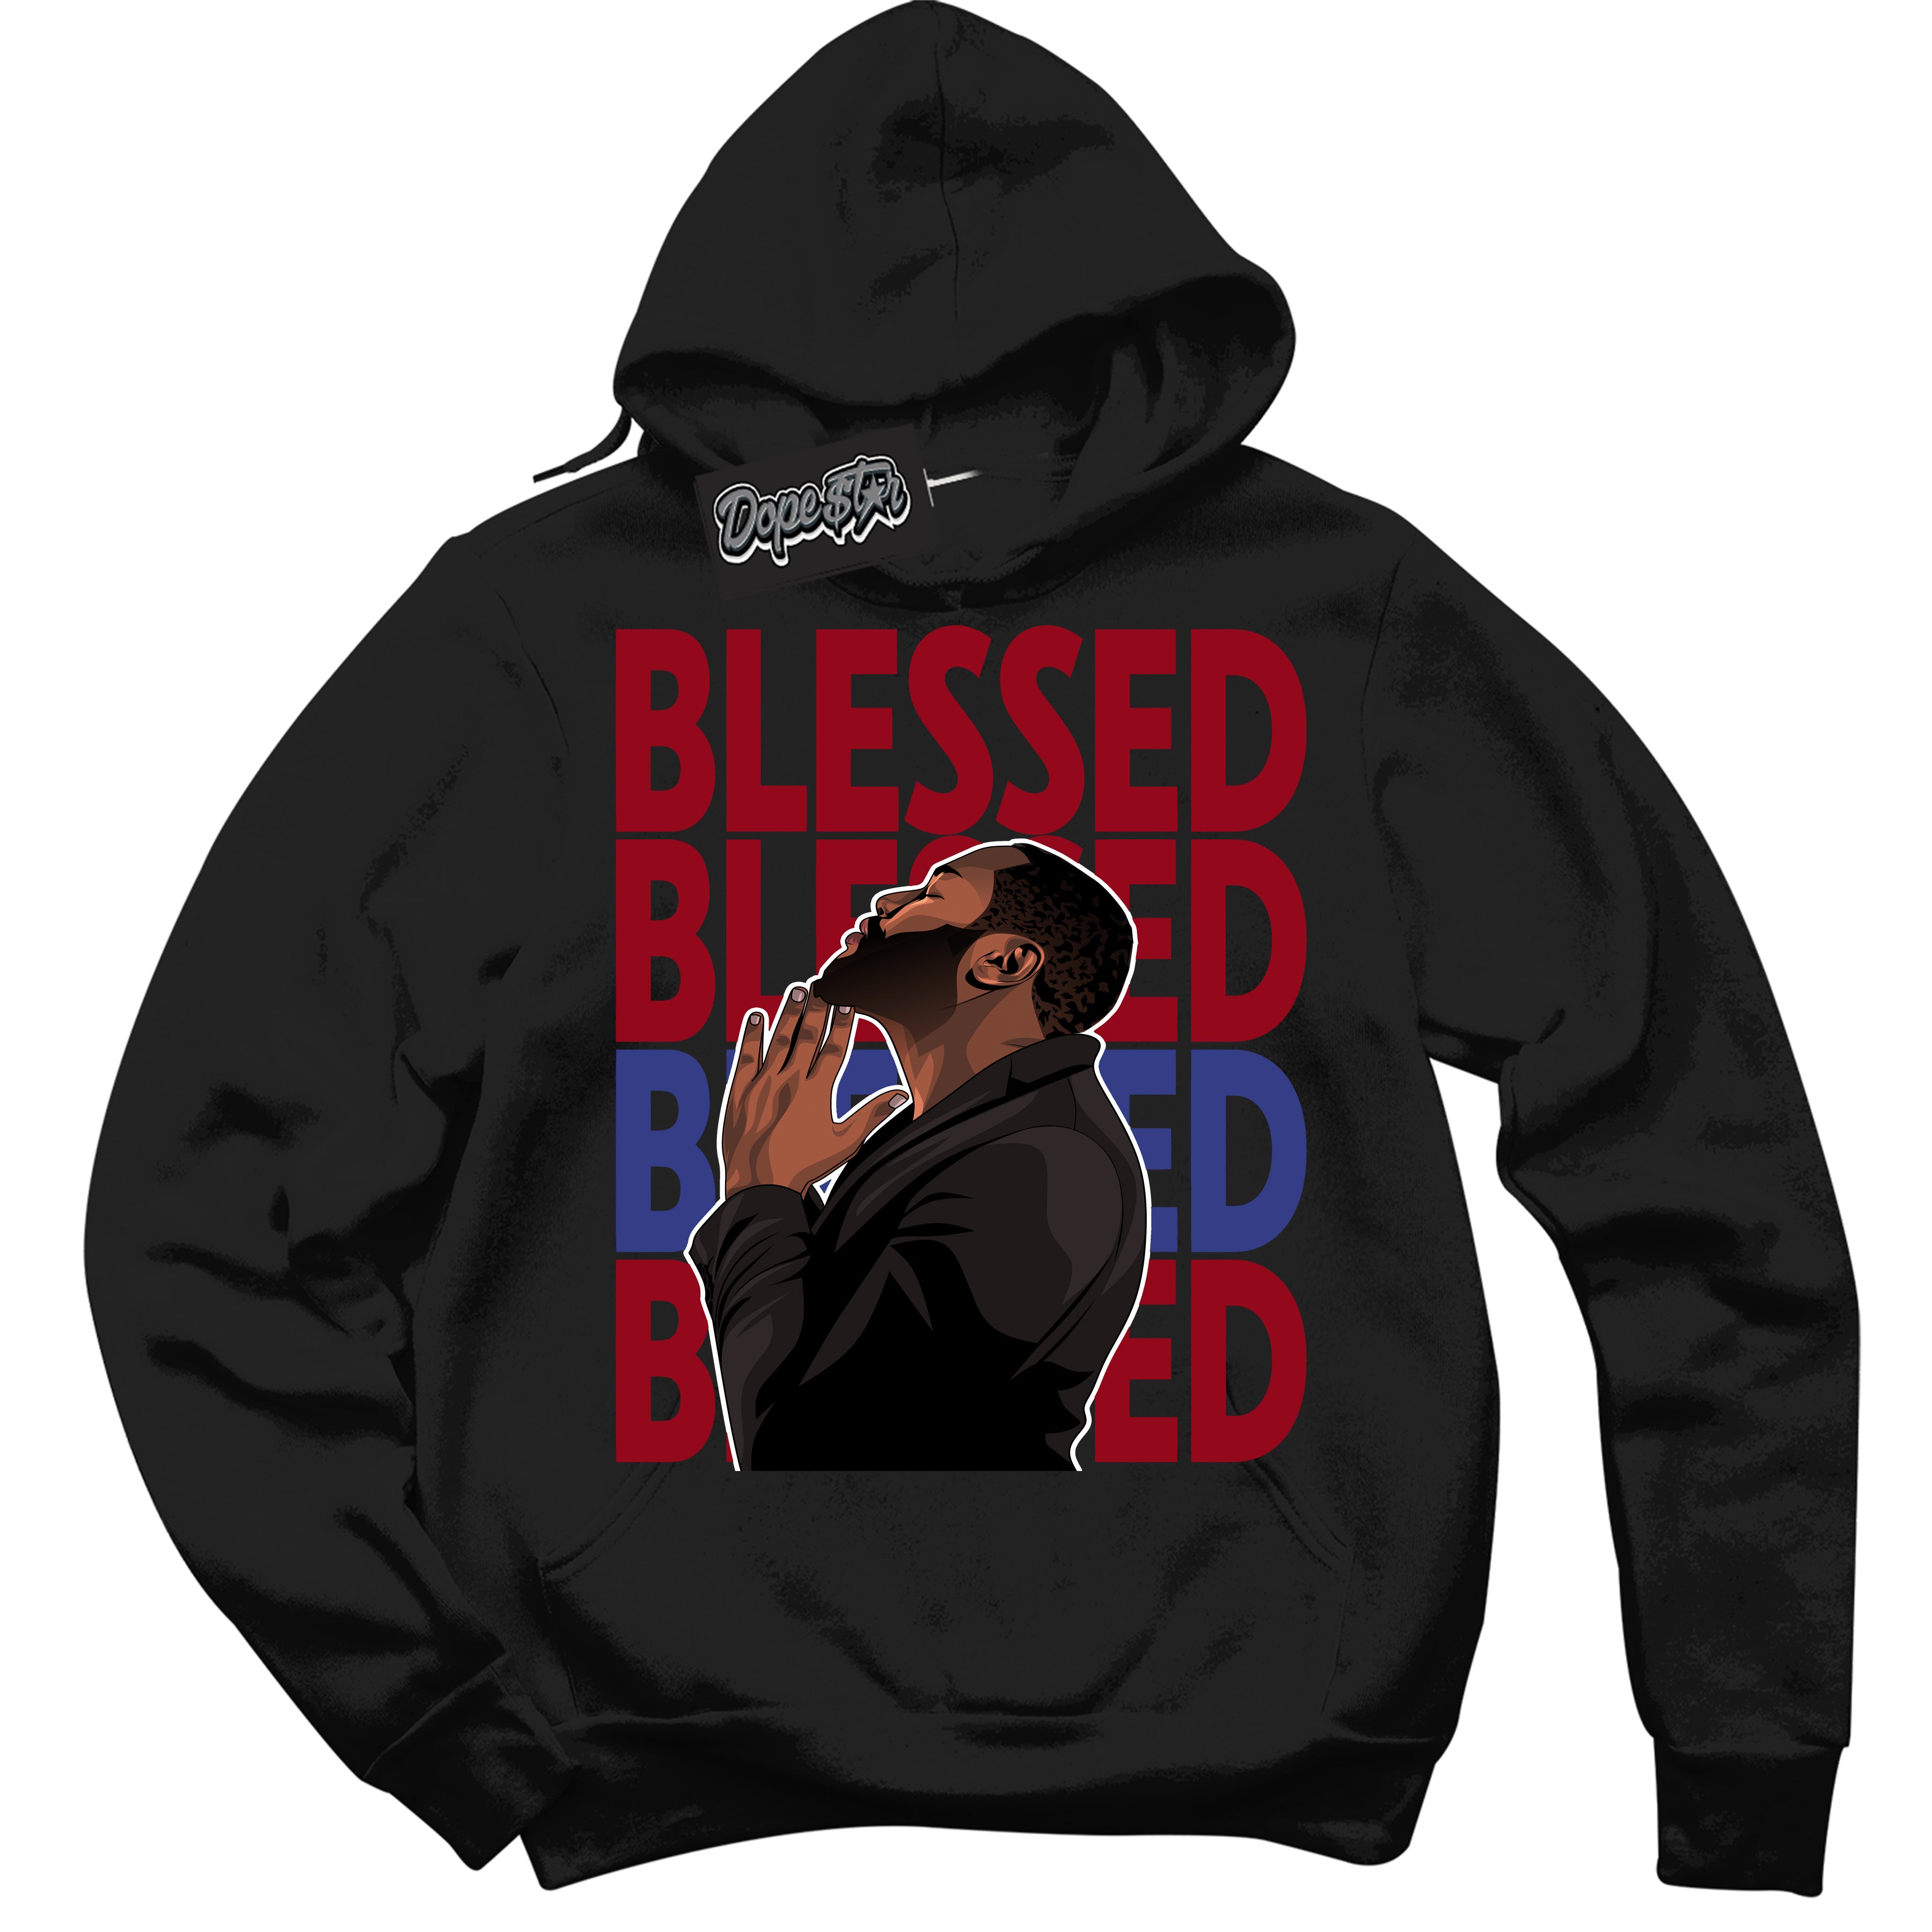 Cool Black Hoodie with “ God Blessed ”  design that Perfectly Matches Playoffs 8s Sneakers.